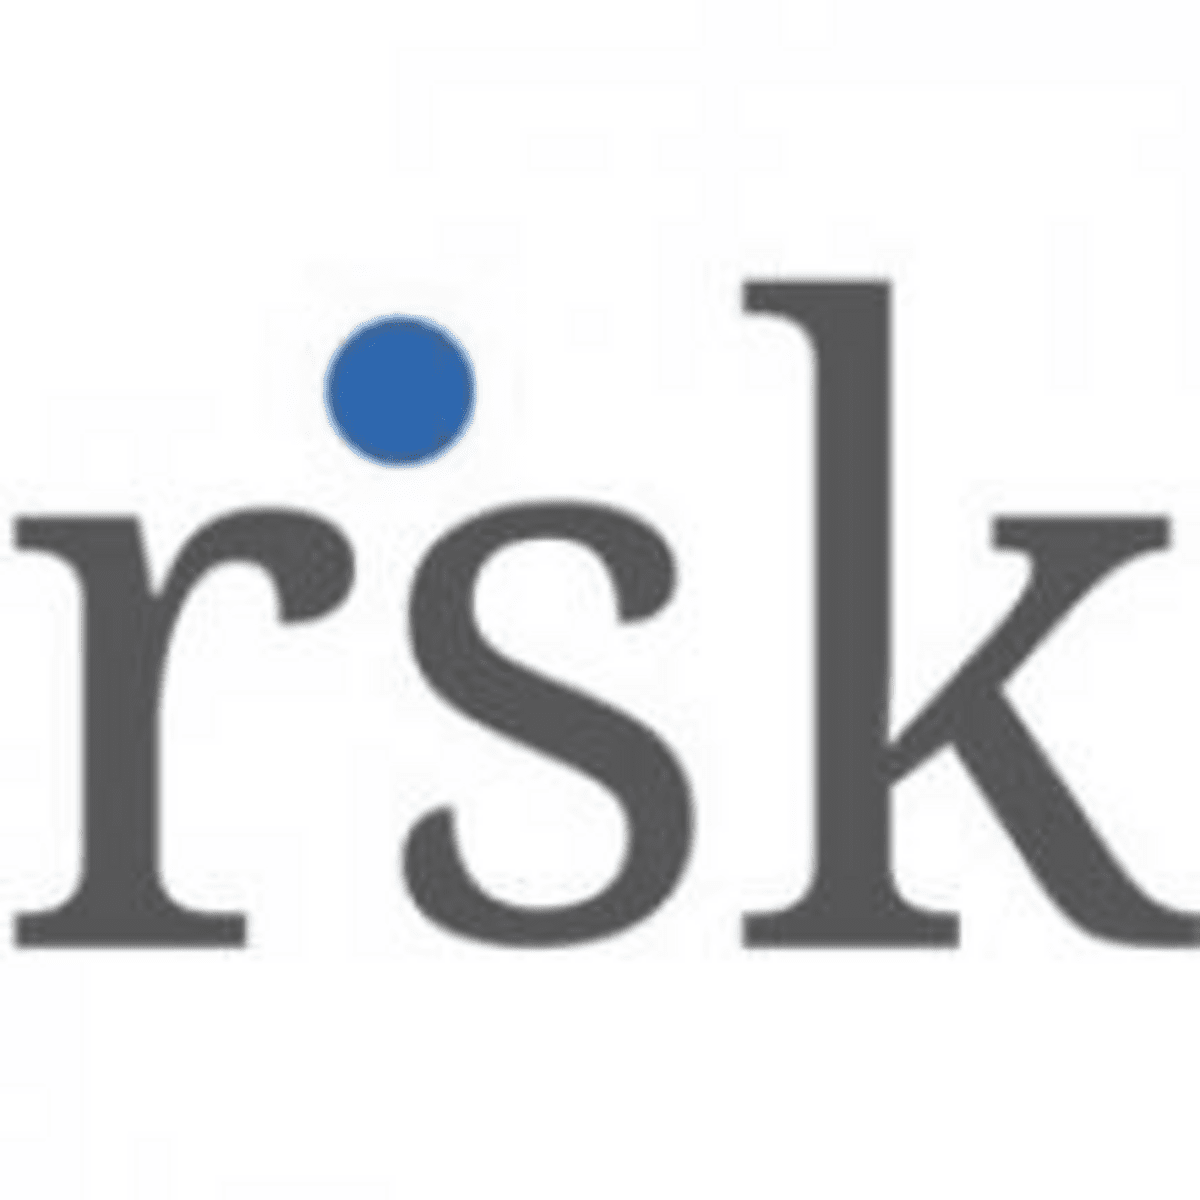 New Job Opportunities at RSK Consulting Ltd 2022, RSK Jobs in Tanzania,rsk application login, rsk benefits, rsk staff, rsk group tanzania, rsk projects, rsk news